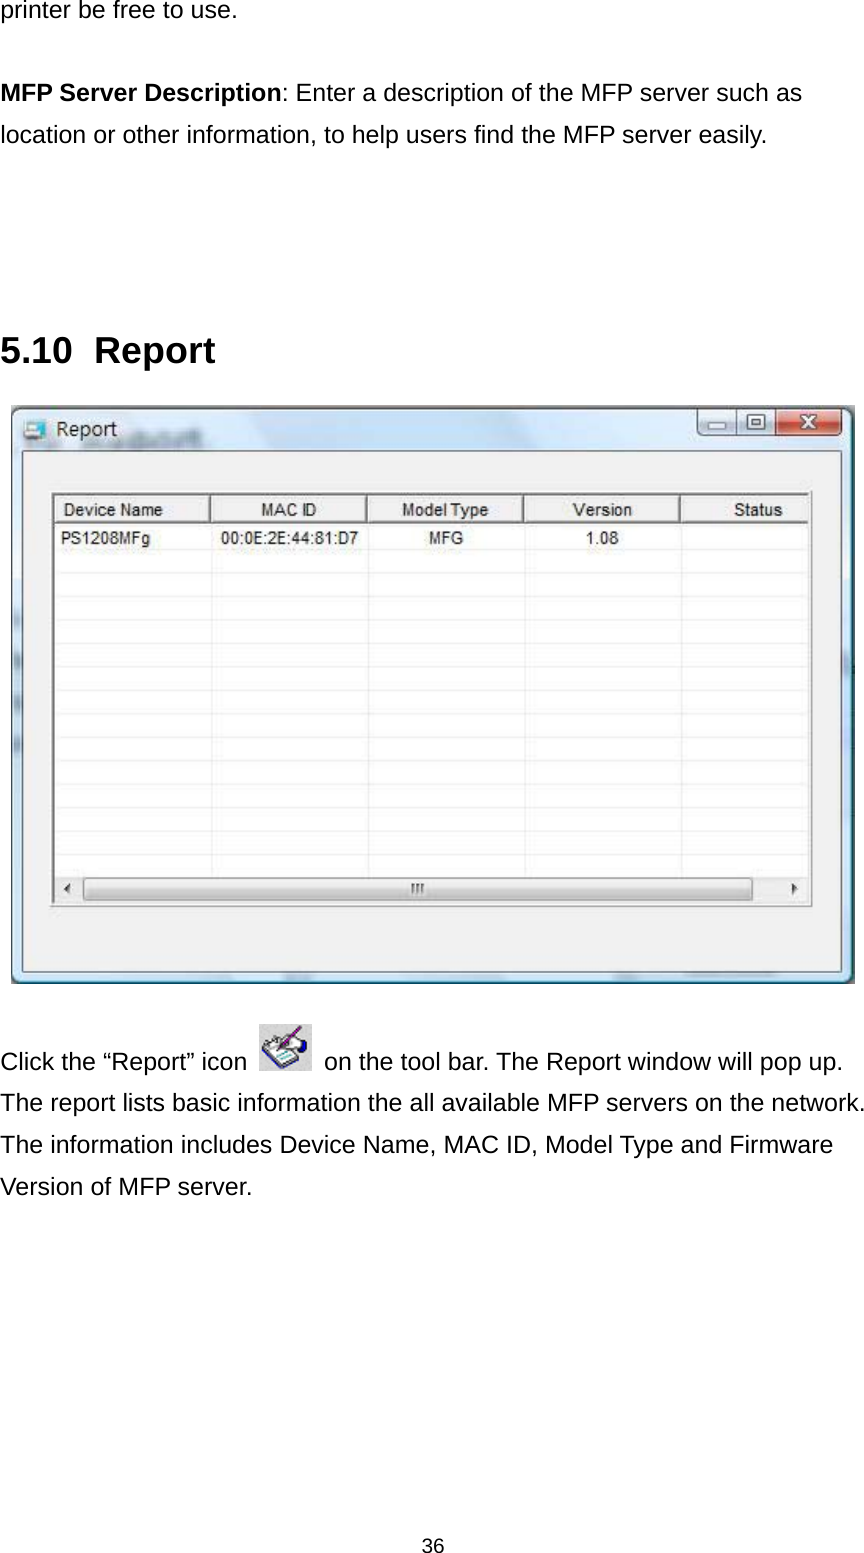 36 printer be free to use.  MFP Server Description: Enter a description of the MFP server such as location or other information, to help users find the MFP server easily.     5.10 Report   Click the “Report” icon    on the tool bar. The Report window will pop up. The report lists basic information the all available MFP servers on the network. The information includes Device Name, MAC ID, Model Type and Firmware Version of MFP server.    